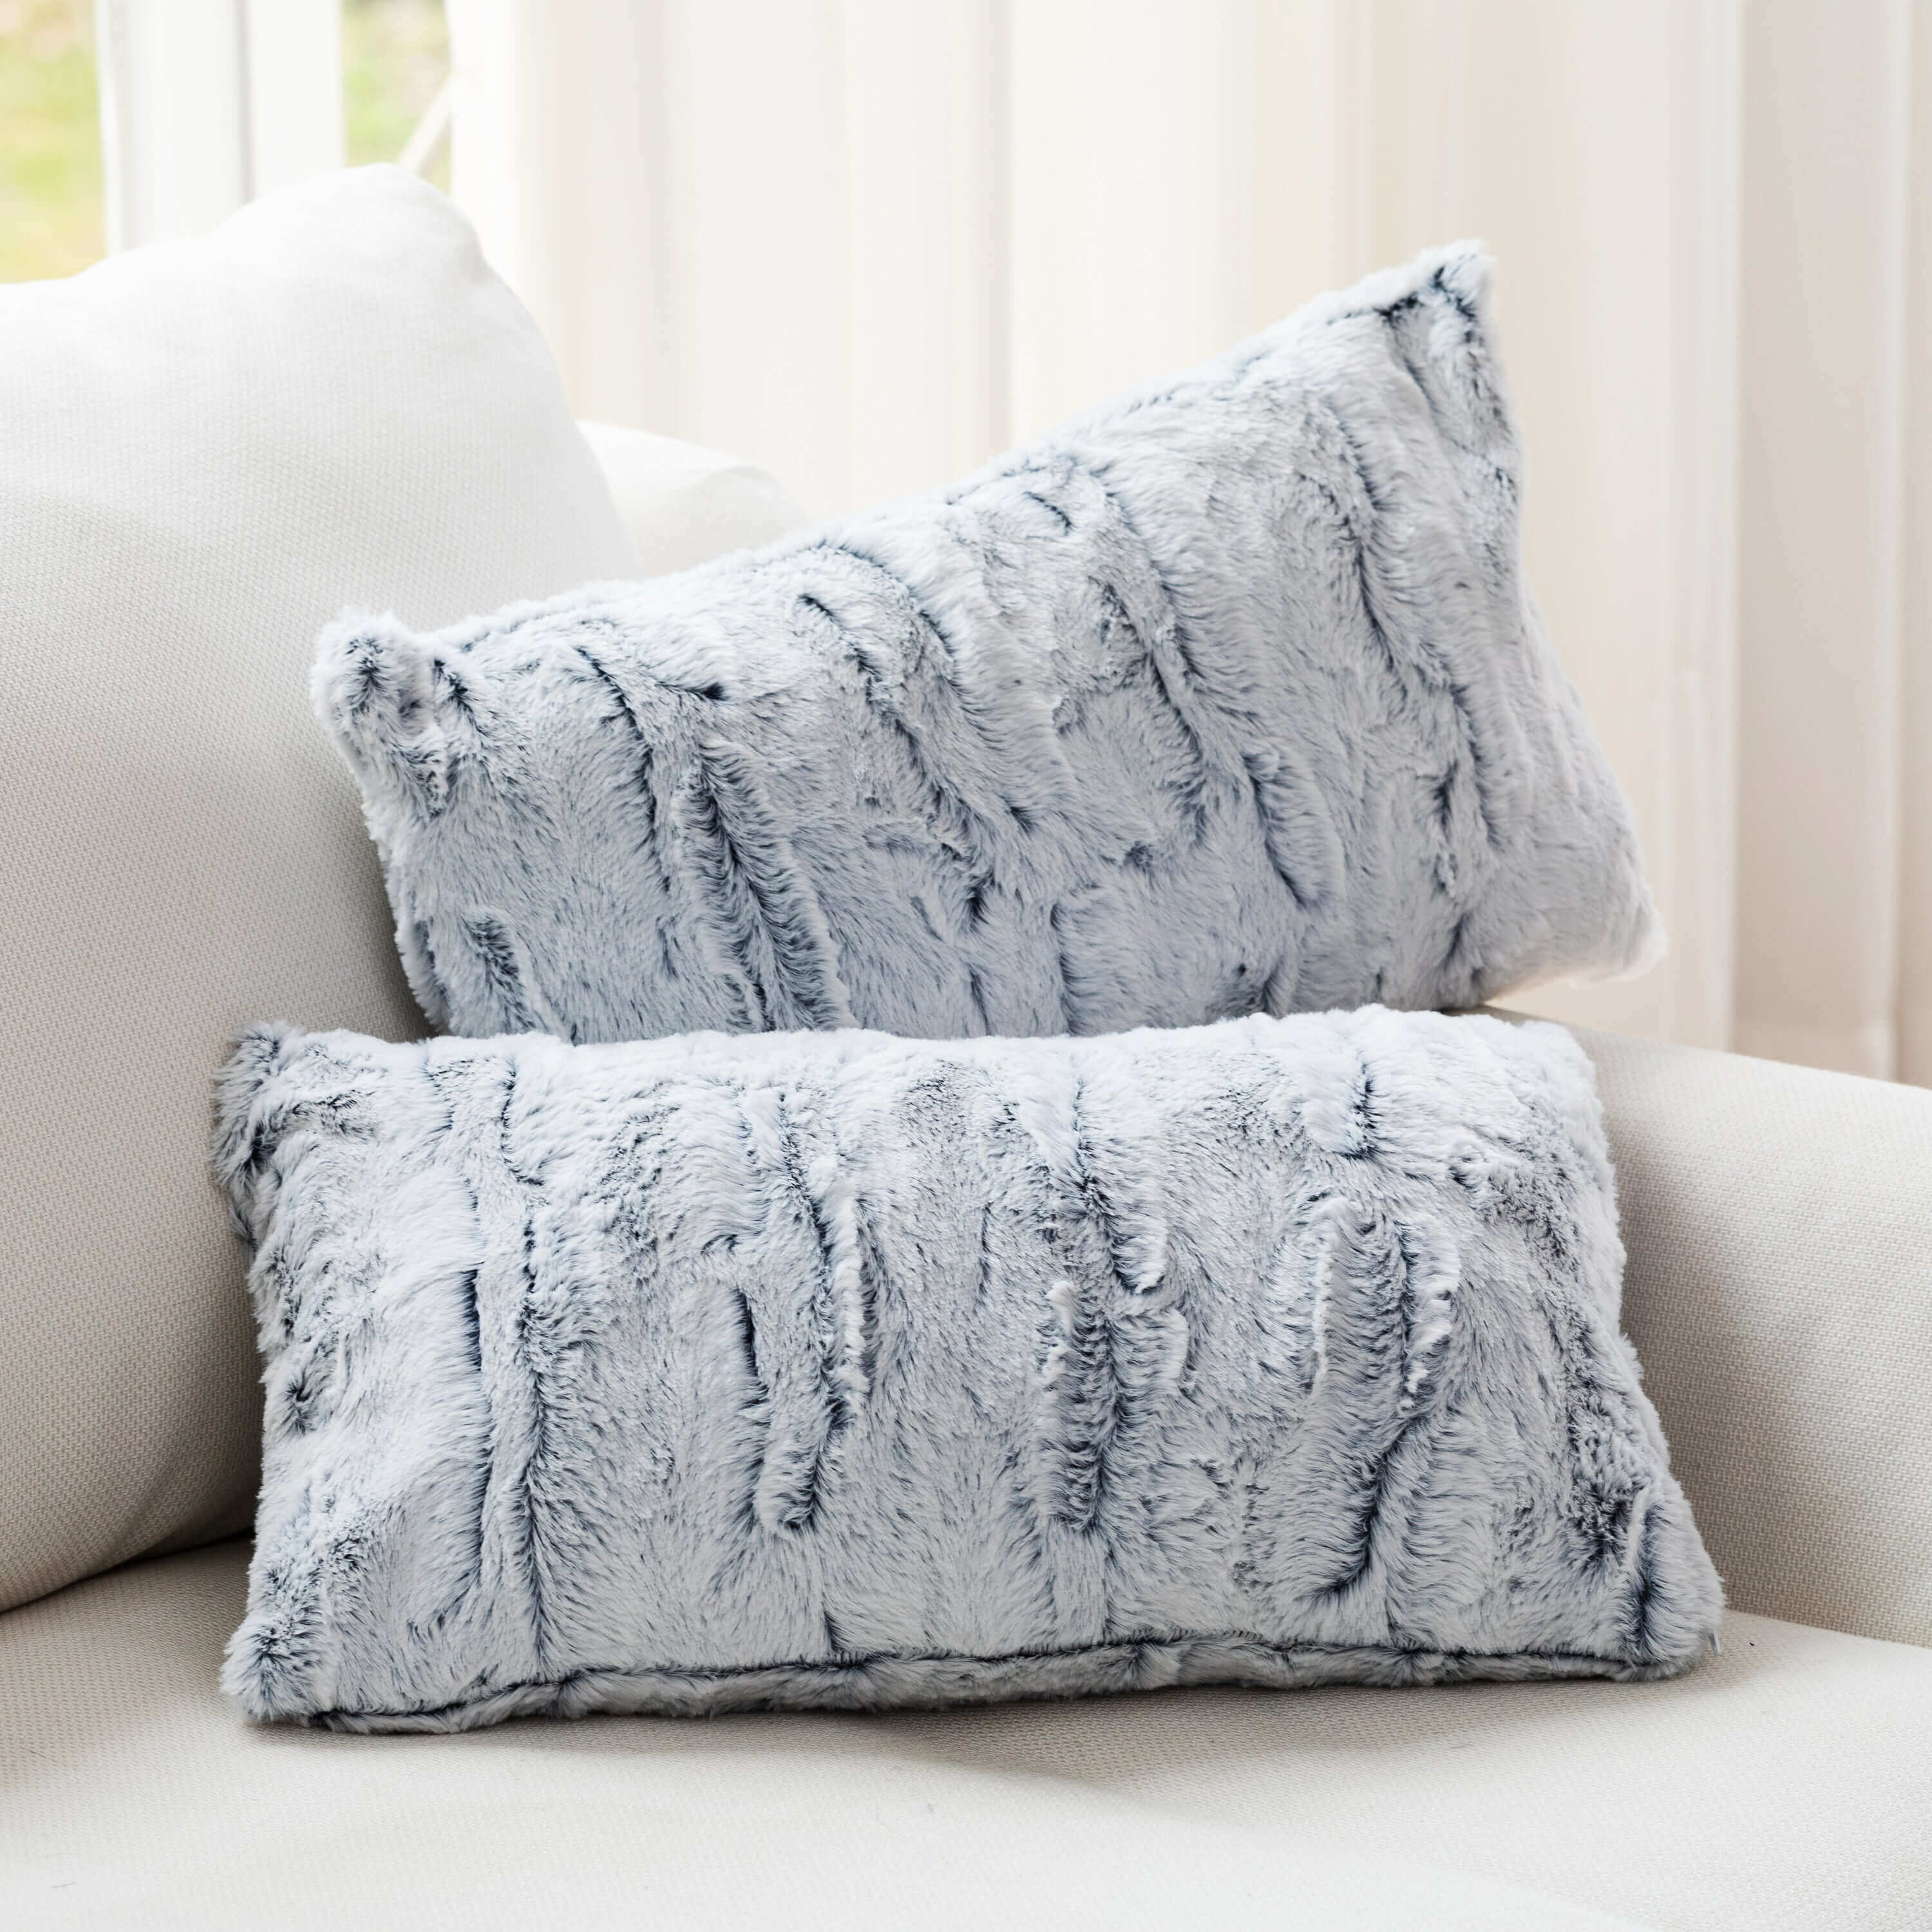 https://cdn.shopify.com/s/files/1/2091/6511/products/cheer-collection-embossed-faux-fur-throw-pillows-12-x-20-whiteblue-112816.jpg?v=1672304311